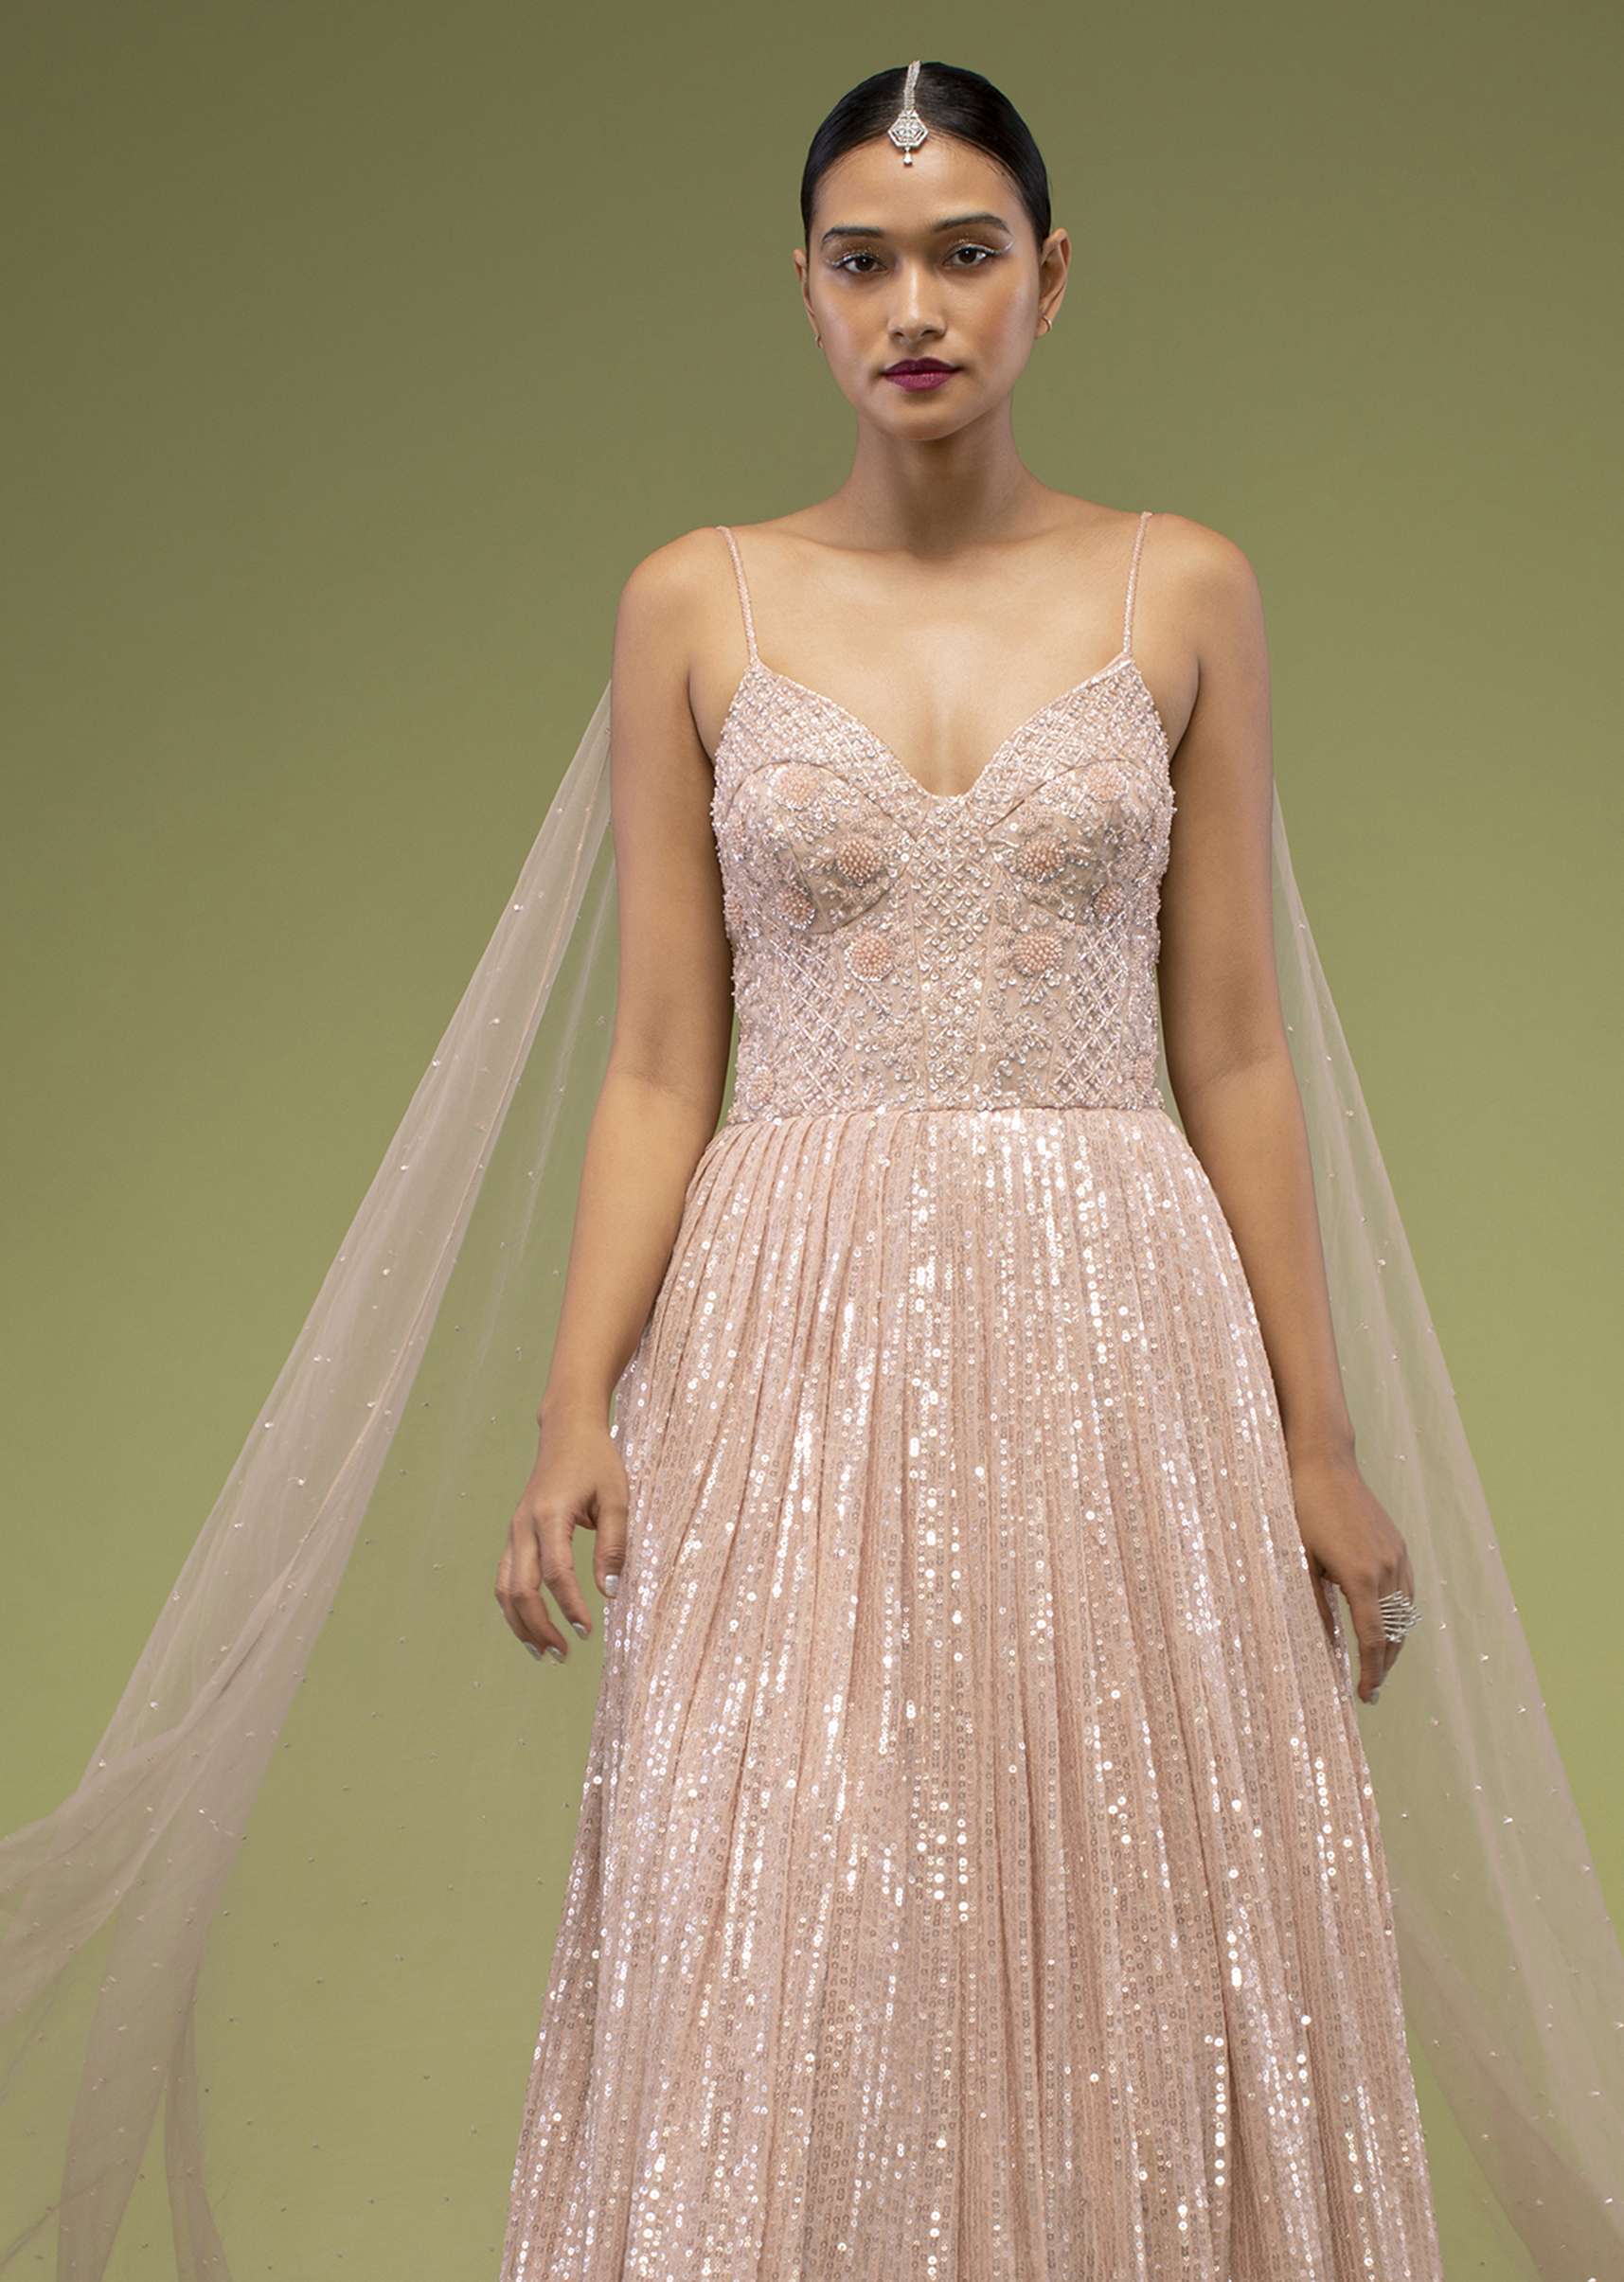 Evening Sand Gown With A Veil In Sequins Embroidery, Crafted In Net With Spaghetti Straps And A Corset Neckline